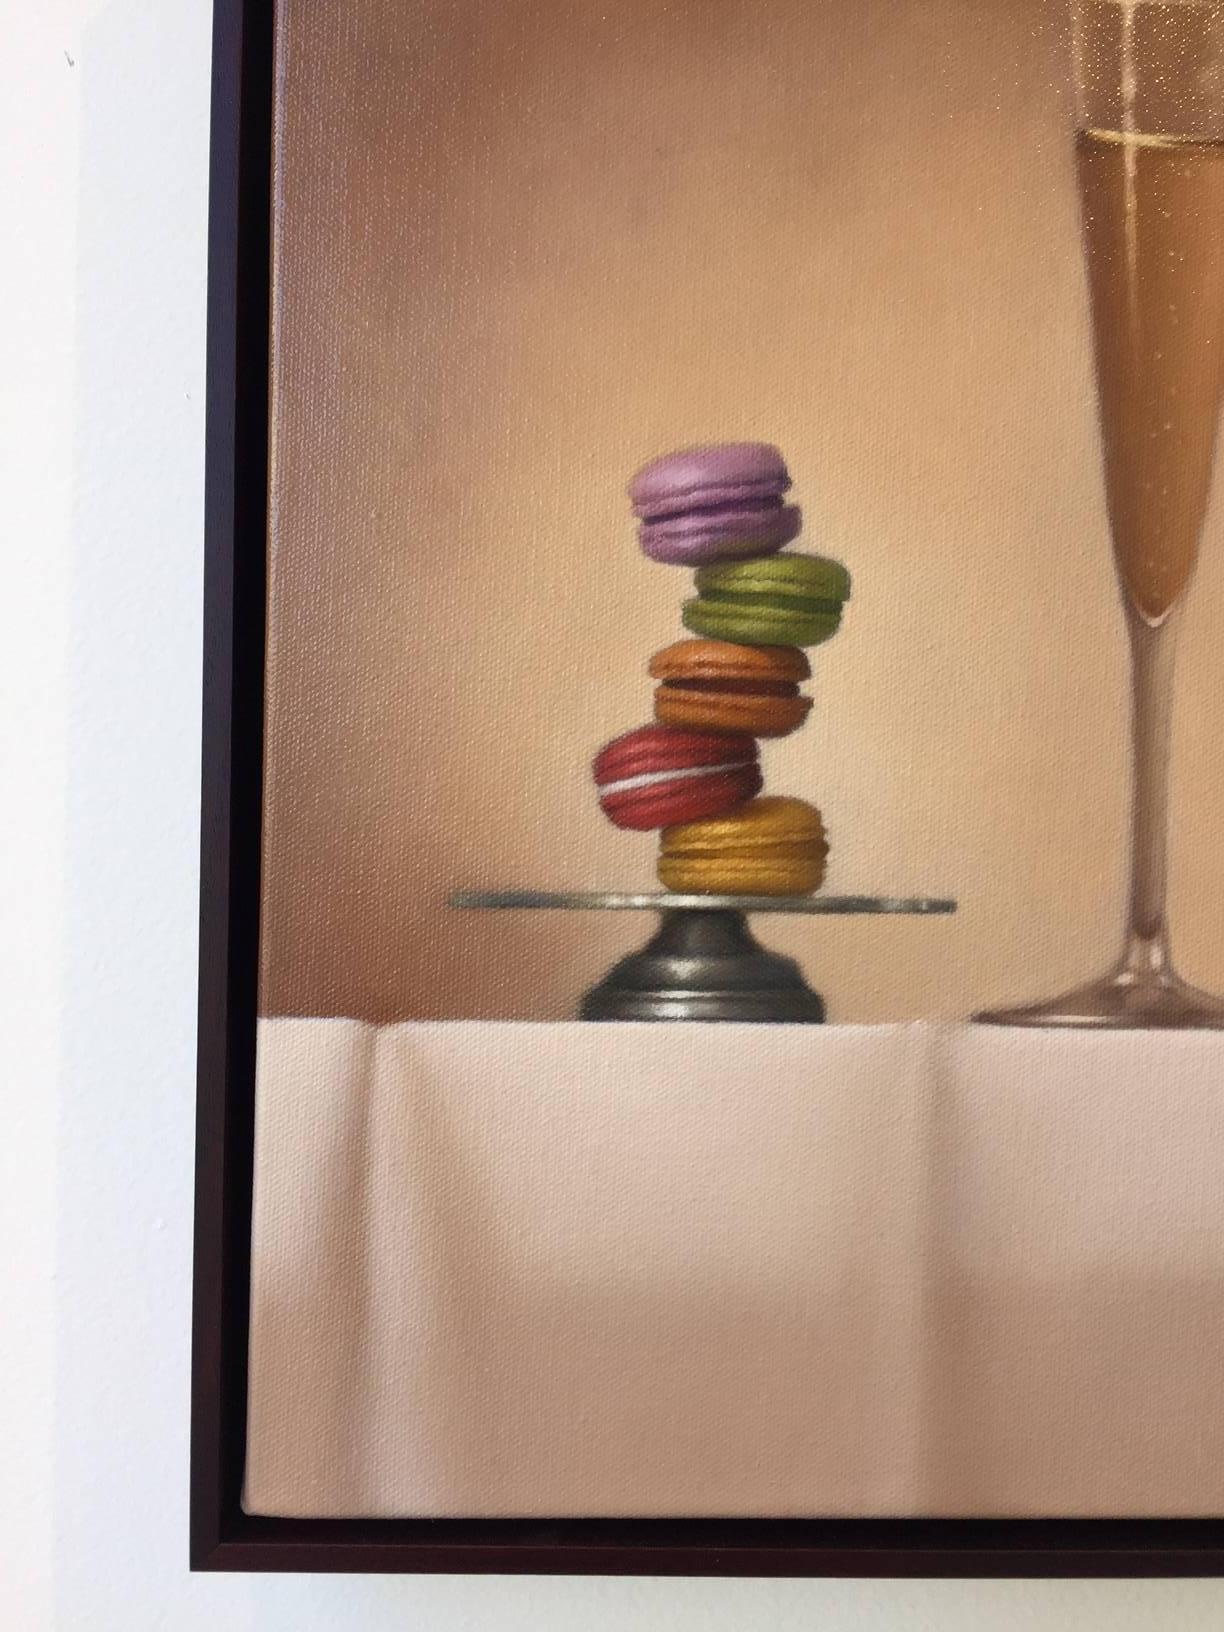 Champagne and French macarons stacked on a silver platter are featured in this delightful still life composition, 'French Toast', oil painting on linen. 

Mimi Jensen uses bold colors to depict theatrically lit objects. Her paintings invite